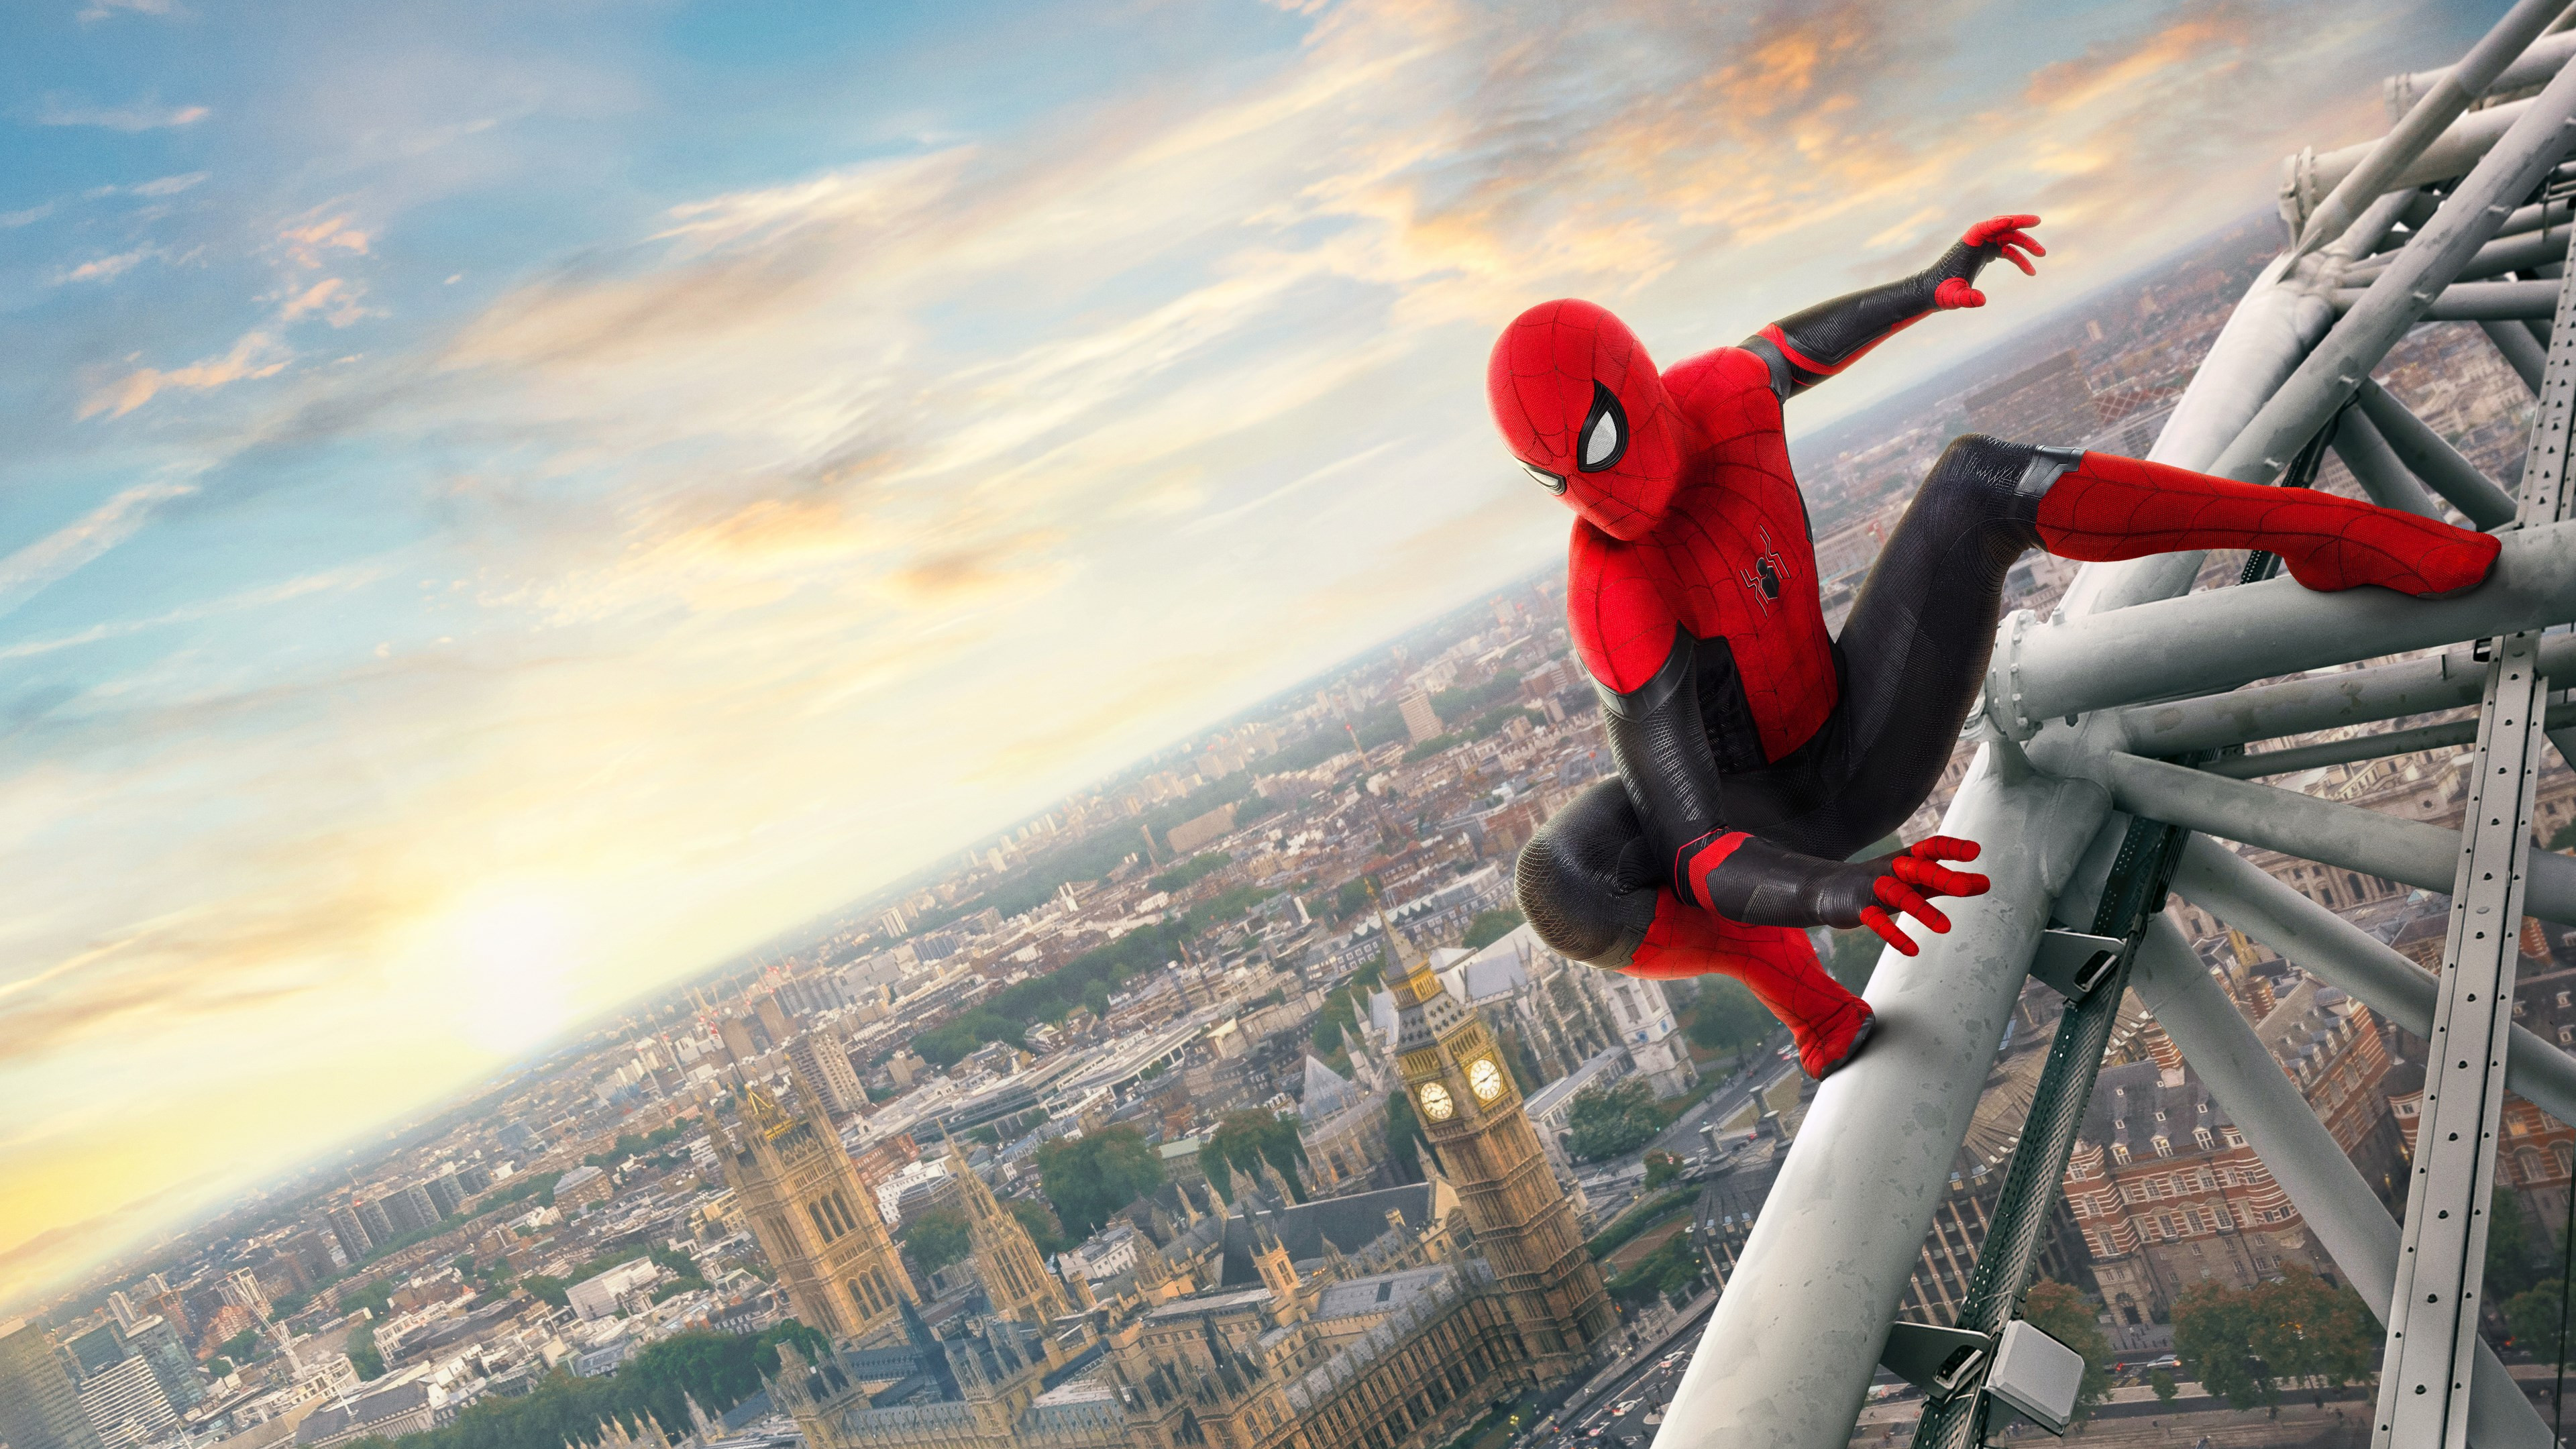 Spider Man: Far From Home 2019 wallpaper 3840x2160